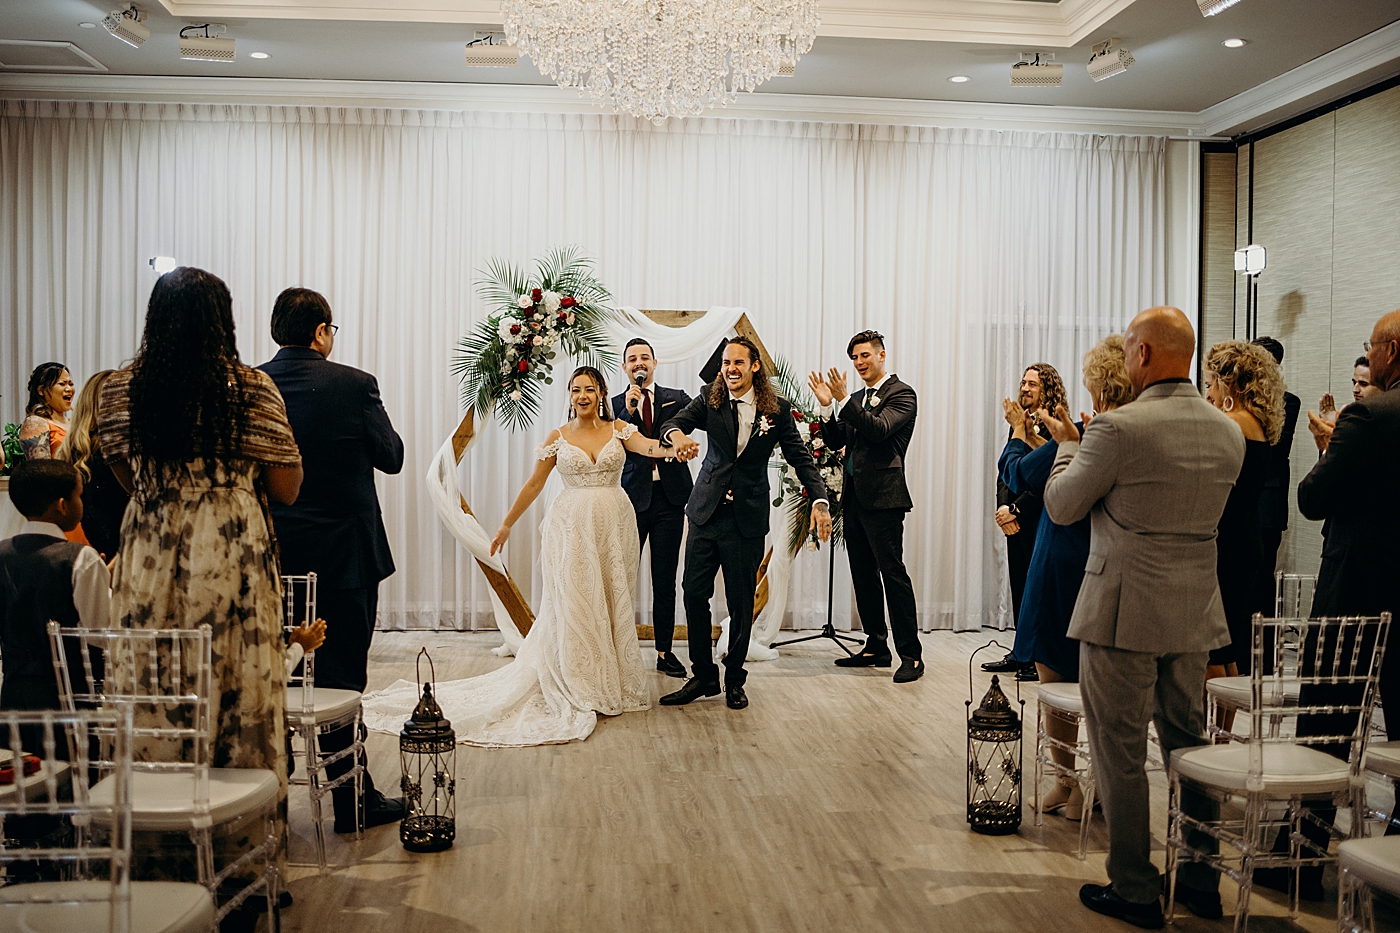 Bride and Groom just married starting to exit ceremony with clapping audience Benvenuto Restaurant Wedding Photography captured by South Florida Wedding Photographer Maggie Alvarez Photography